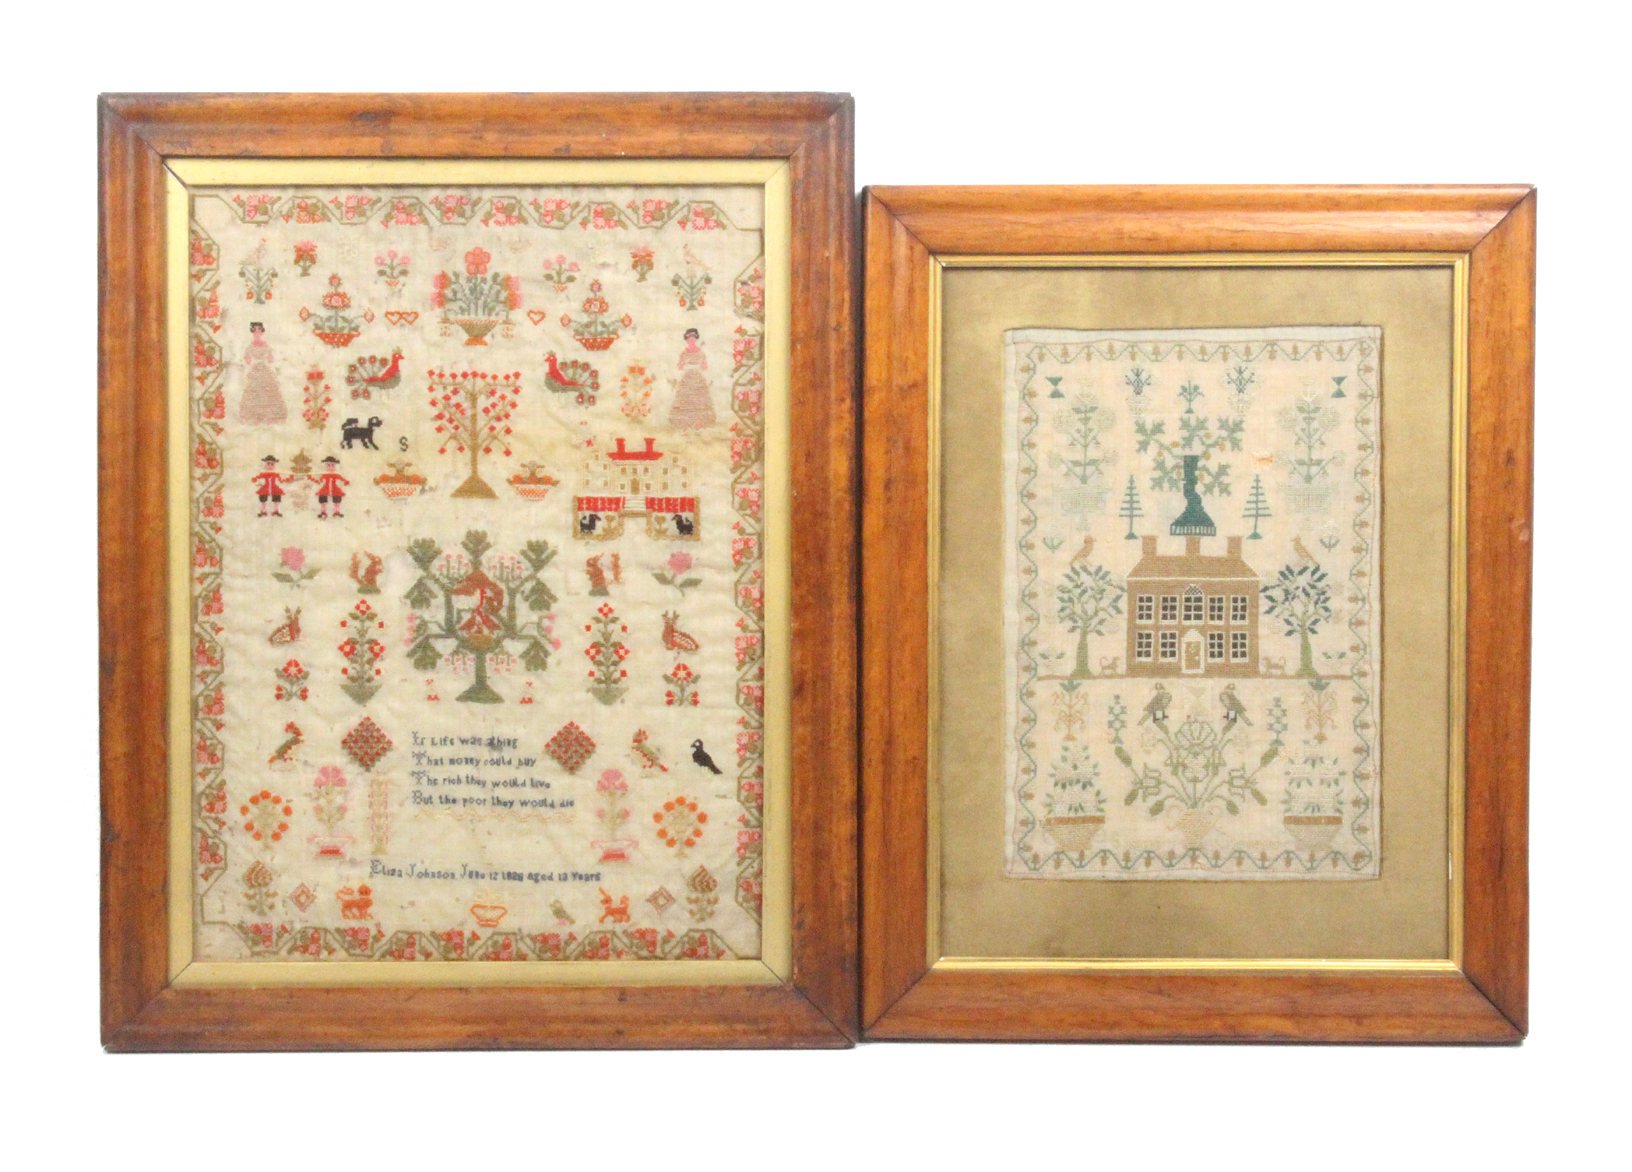 Two early 19th Century samplers comprising a rectangular example by 'Susanna Clements' featuring